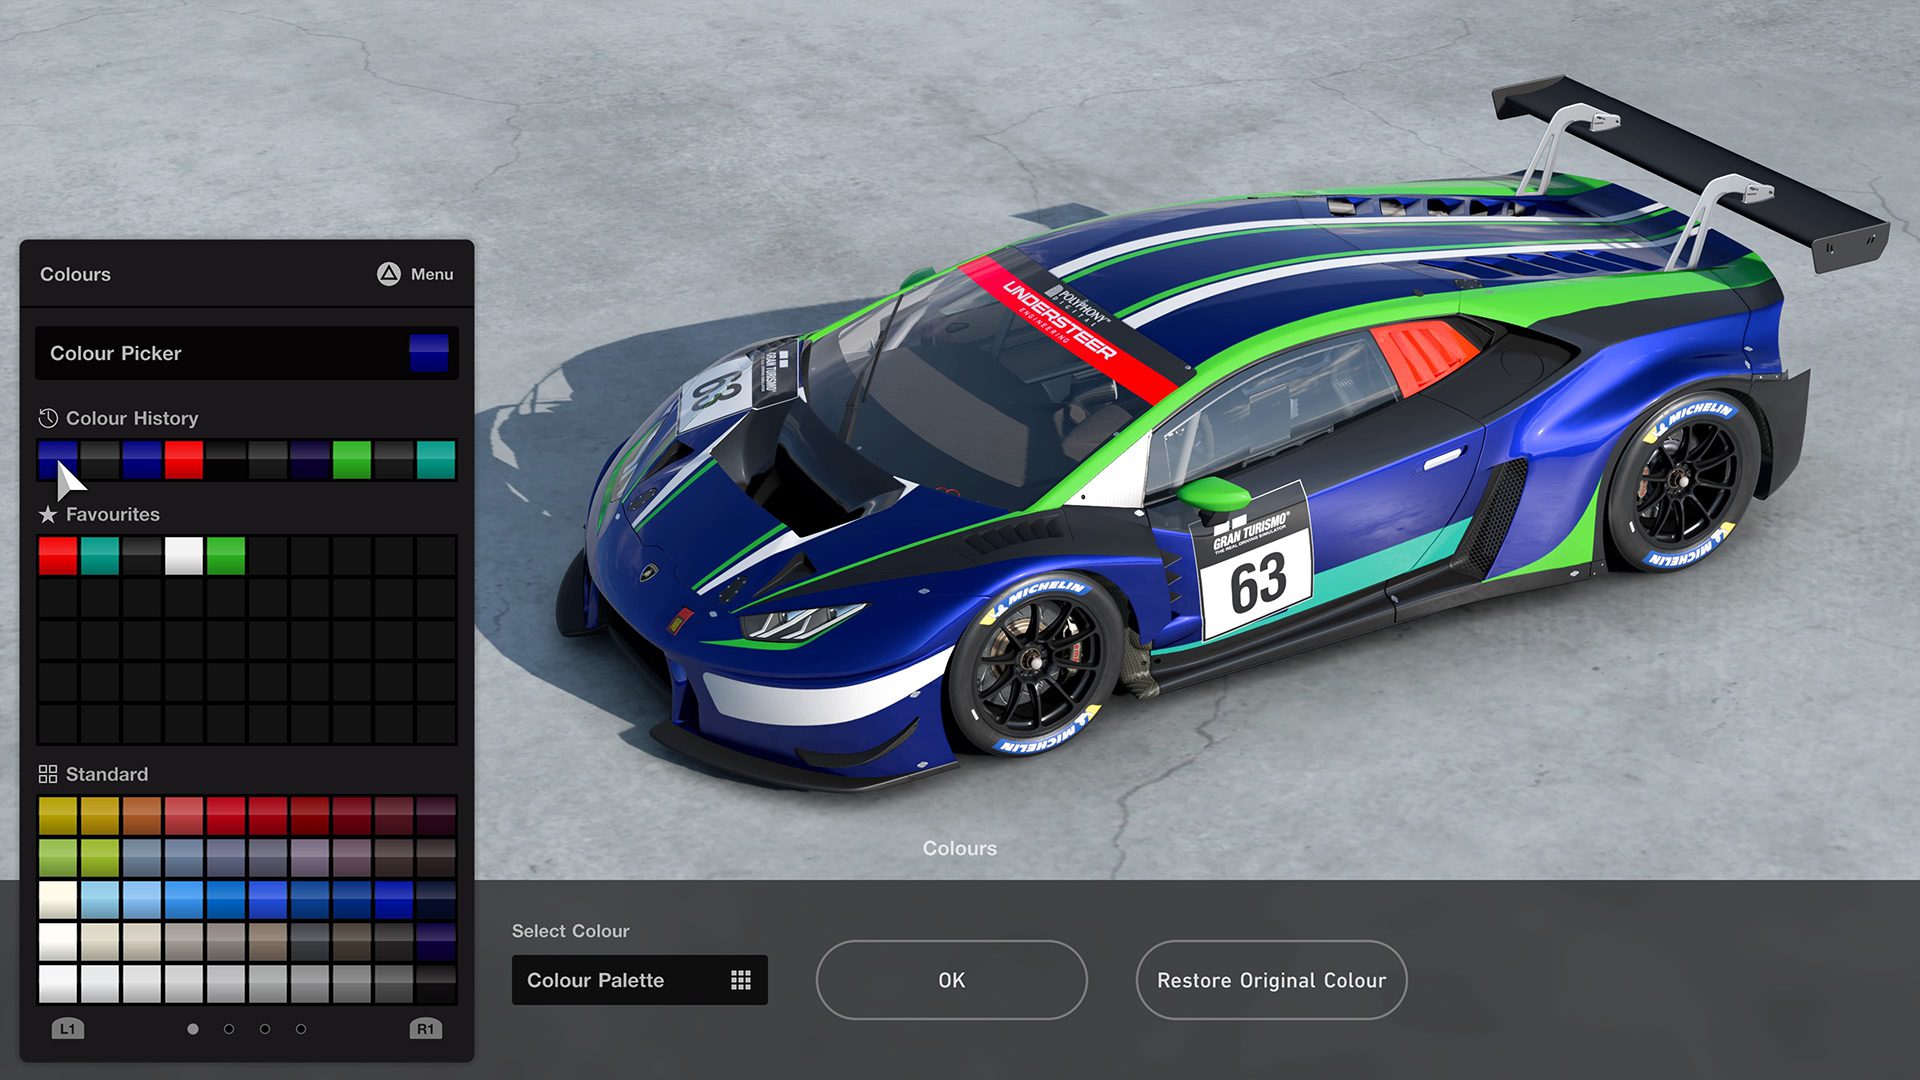 Livery Editor is a new feature in GT7